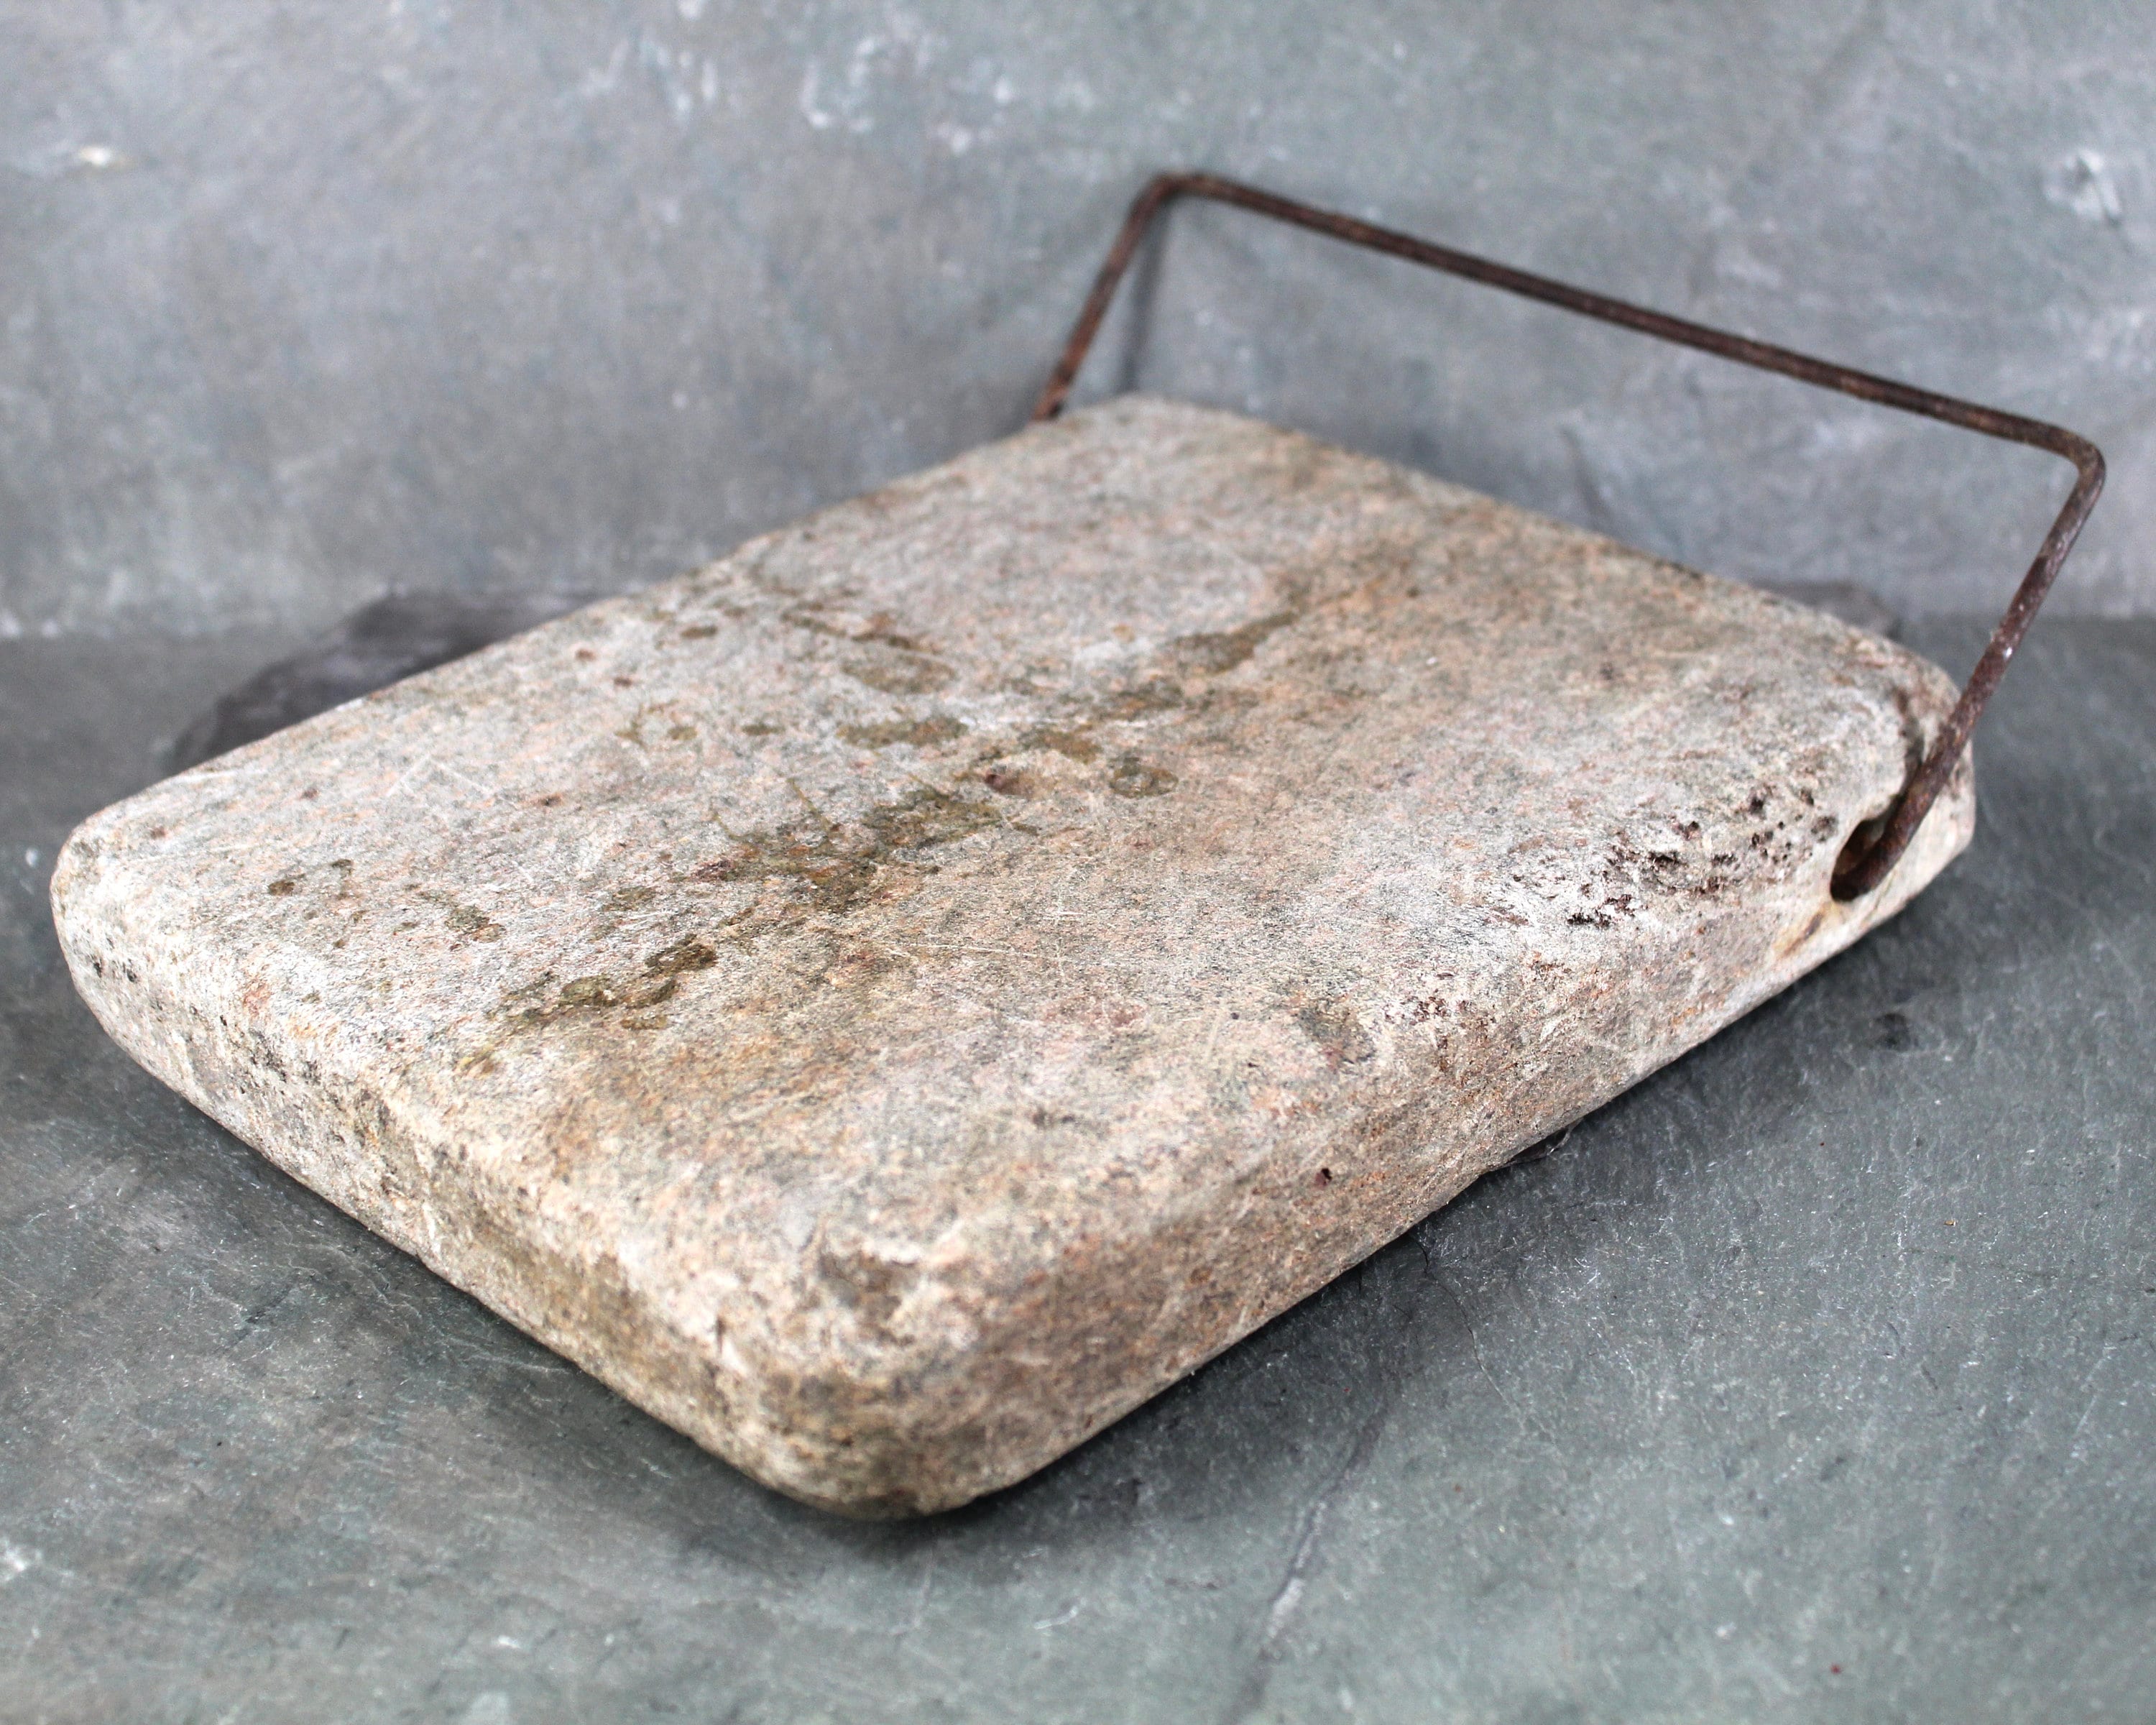 old antique soapstone block foot warmer for sleigh or buggy